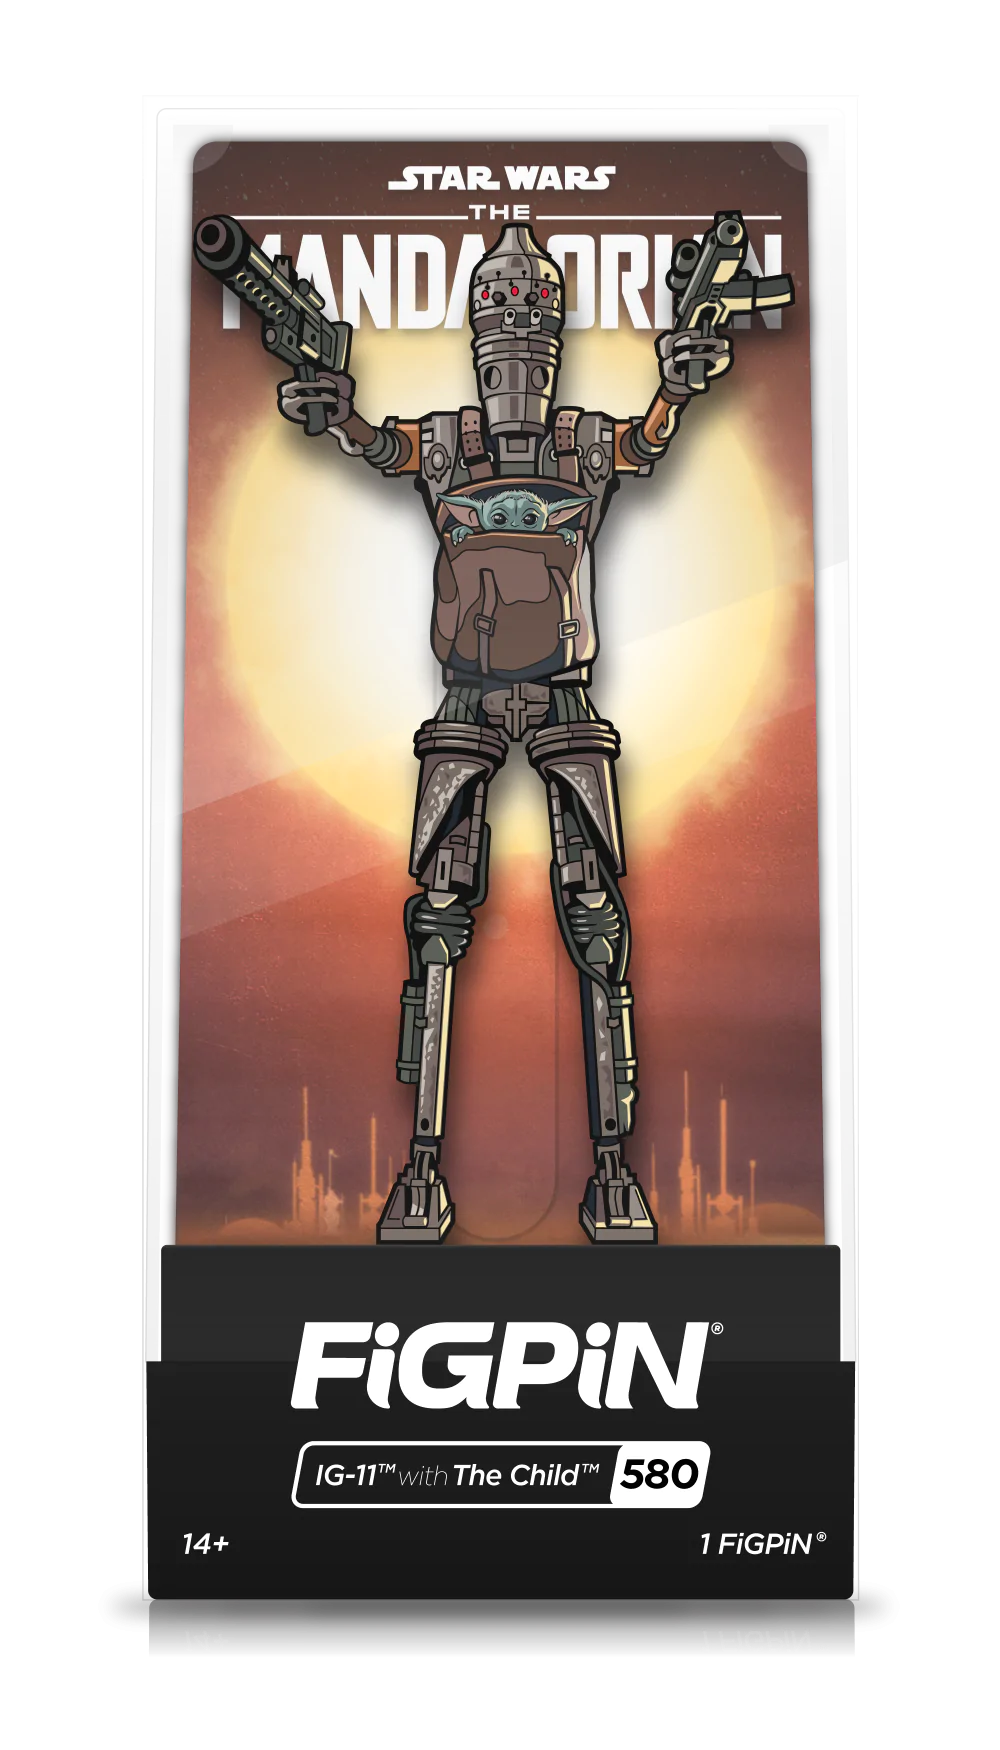 FiGPiN IG-11 with The Child (580) Property: Star Wars The Mandalorian